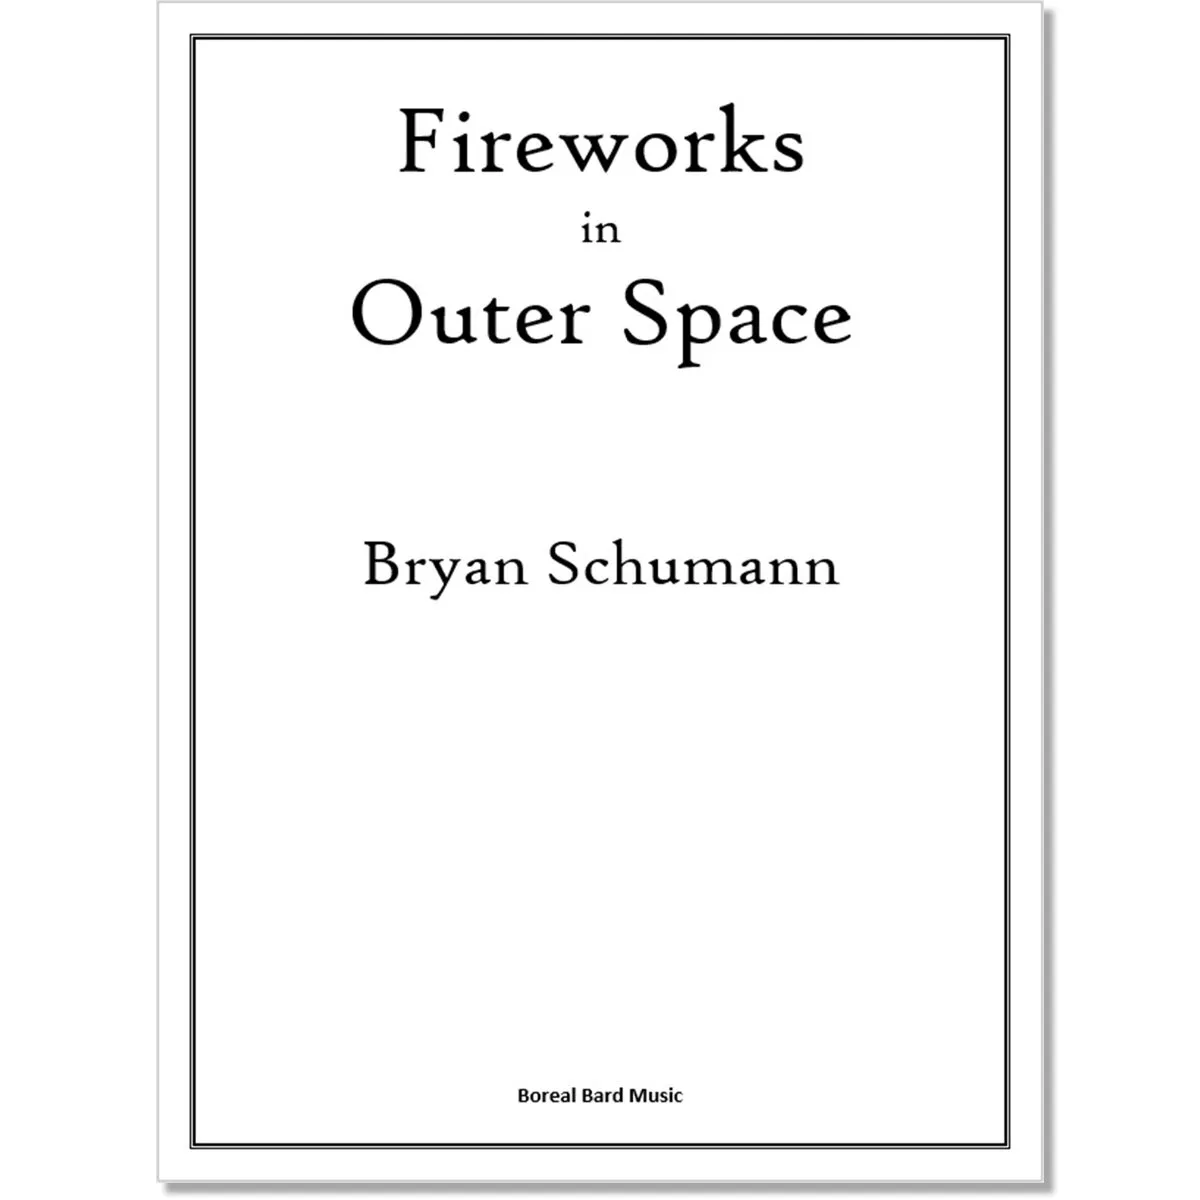 Fireworks in Outer Space (sheet music)